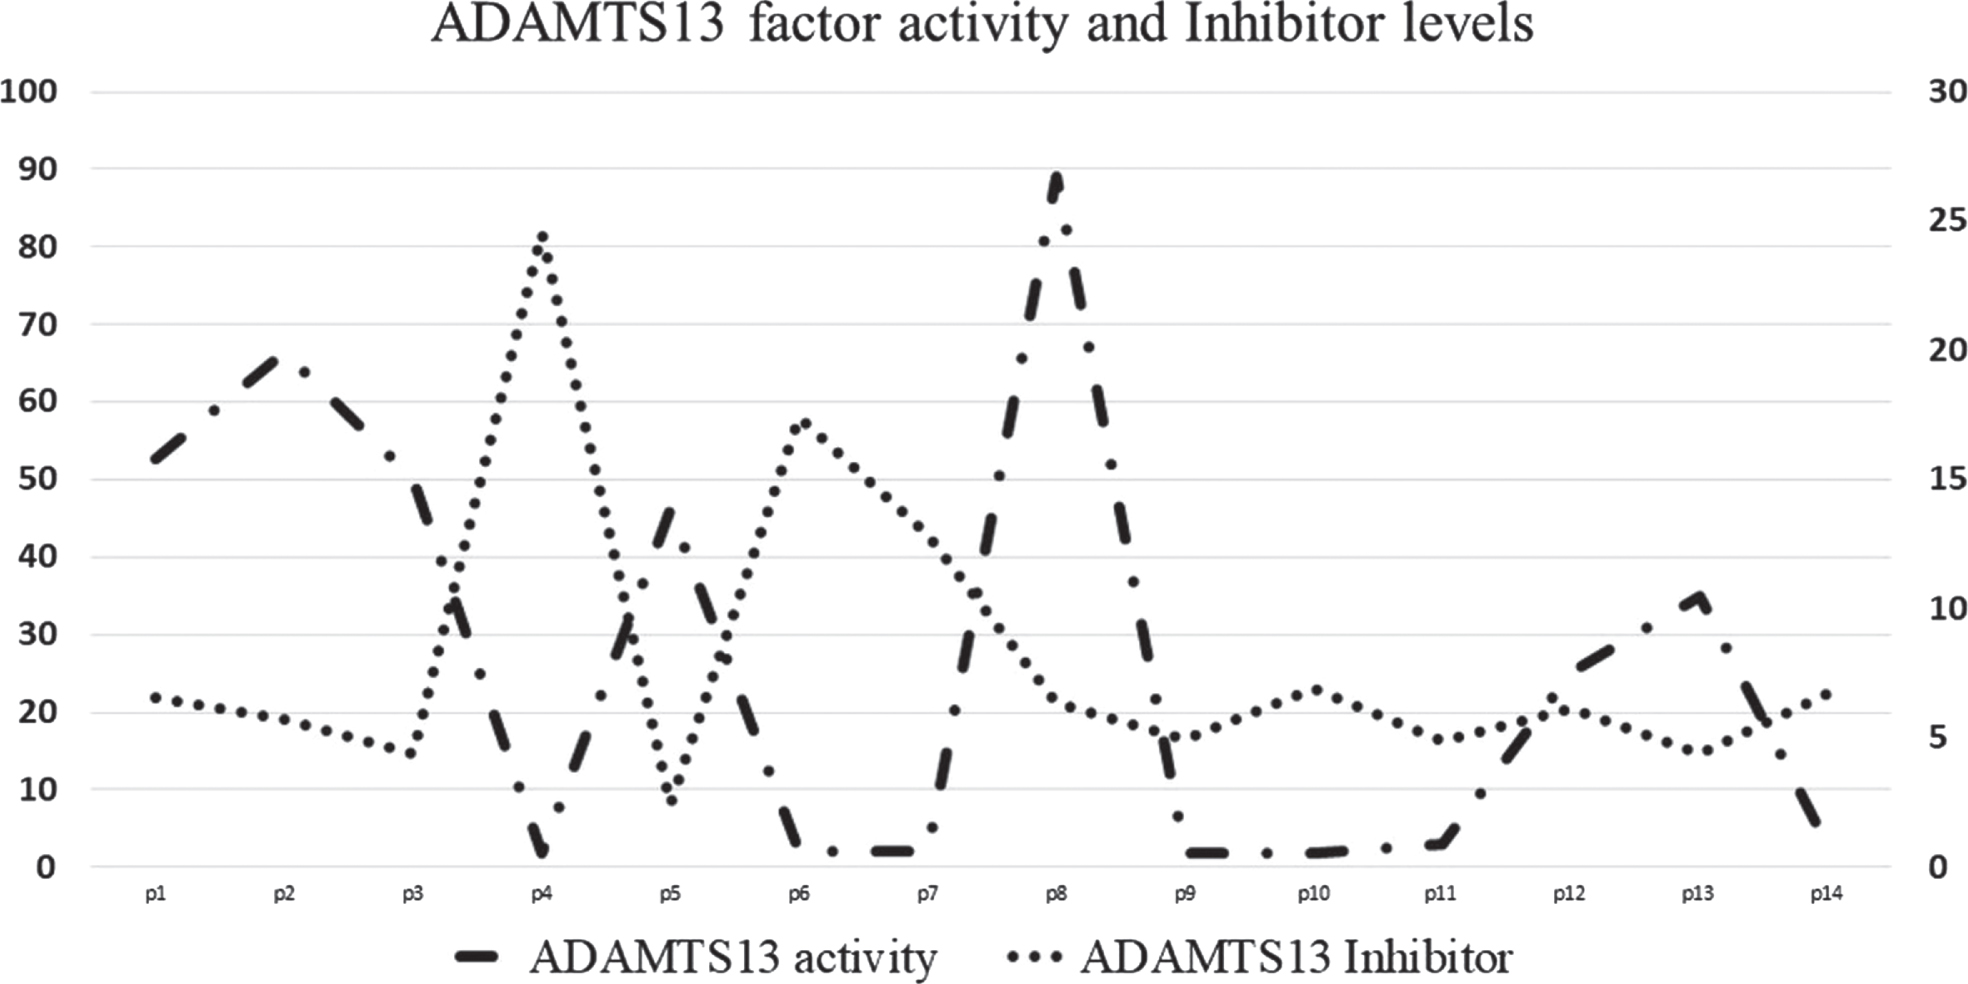 ADAMTS13 factor activity and Inhibitor levels in severe COVID19. ADAMTS13 factor activity is plotted on left y axis and Inhibitor levels is plotted on right y axis.